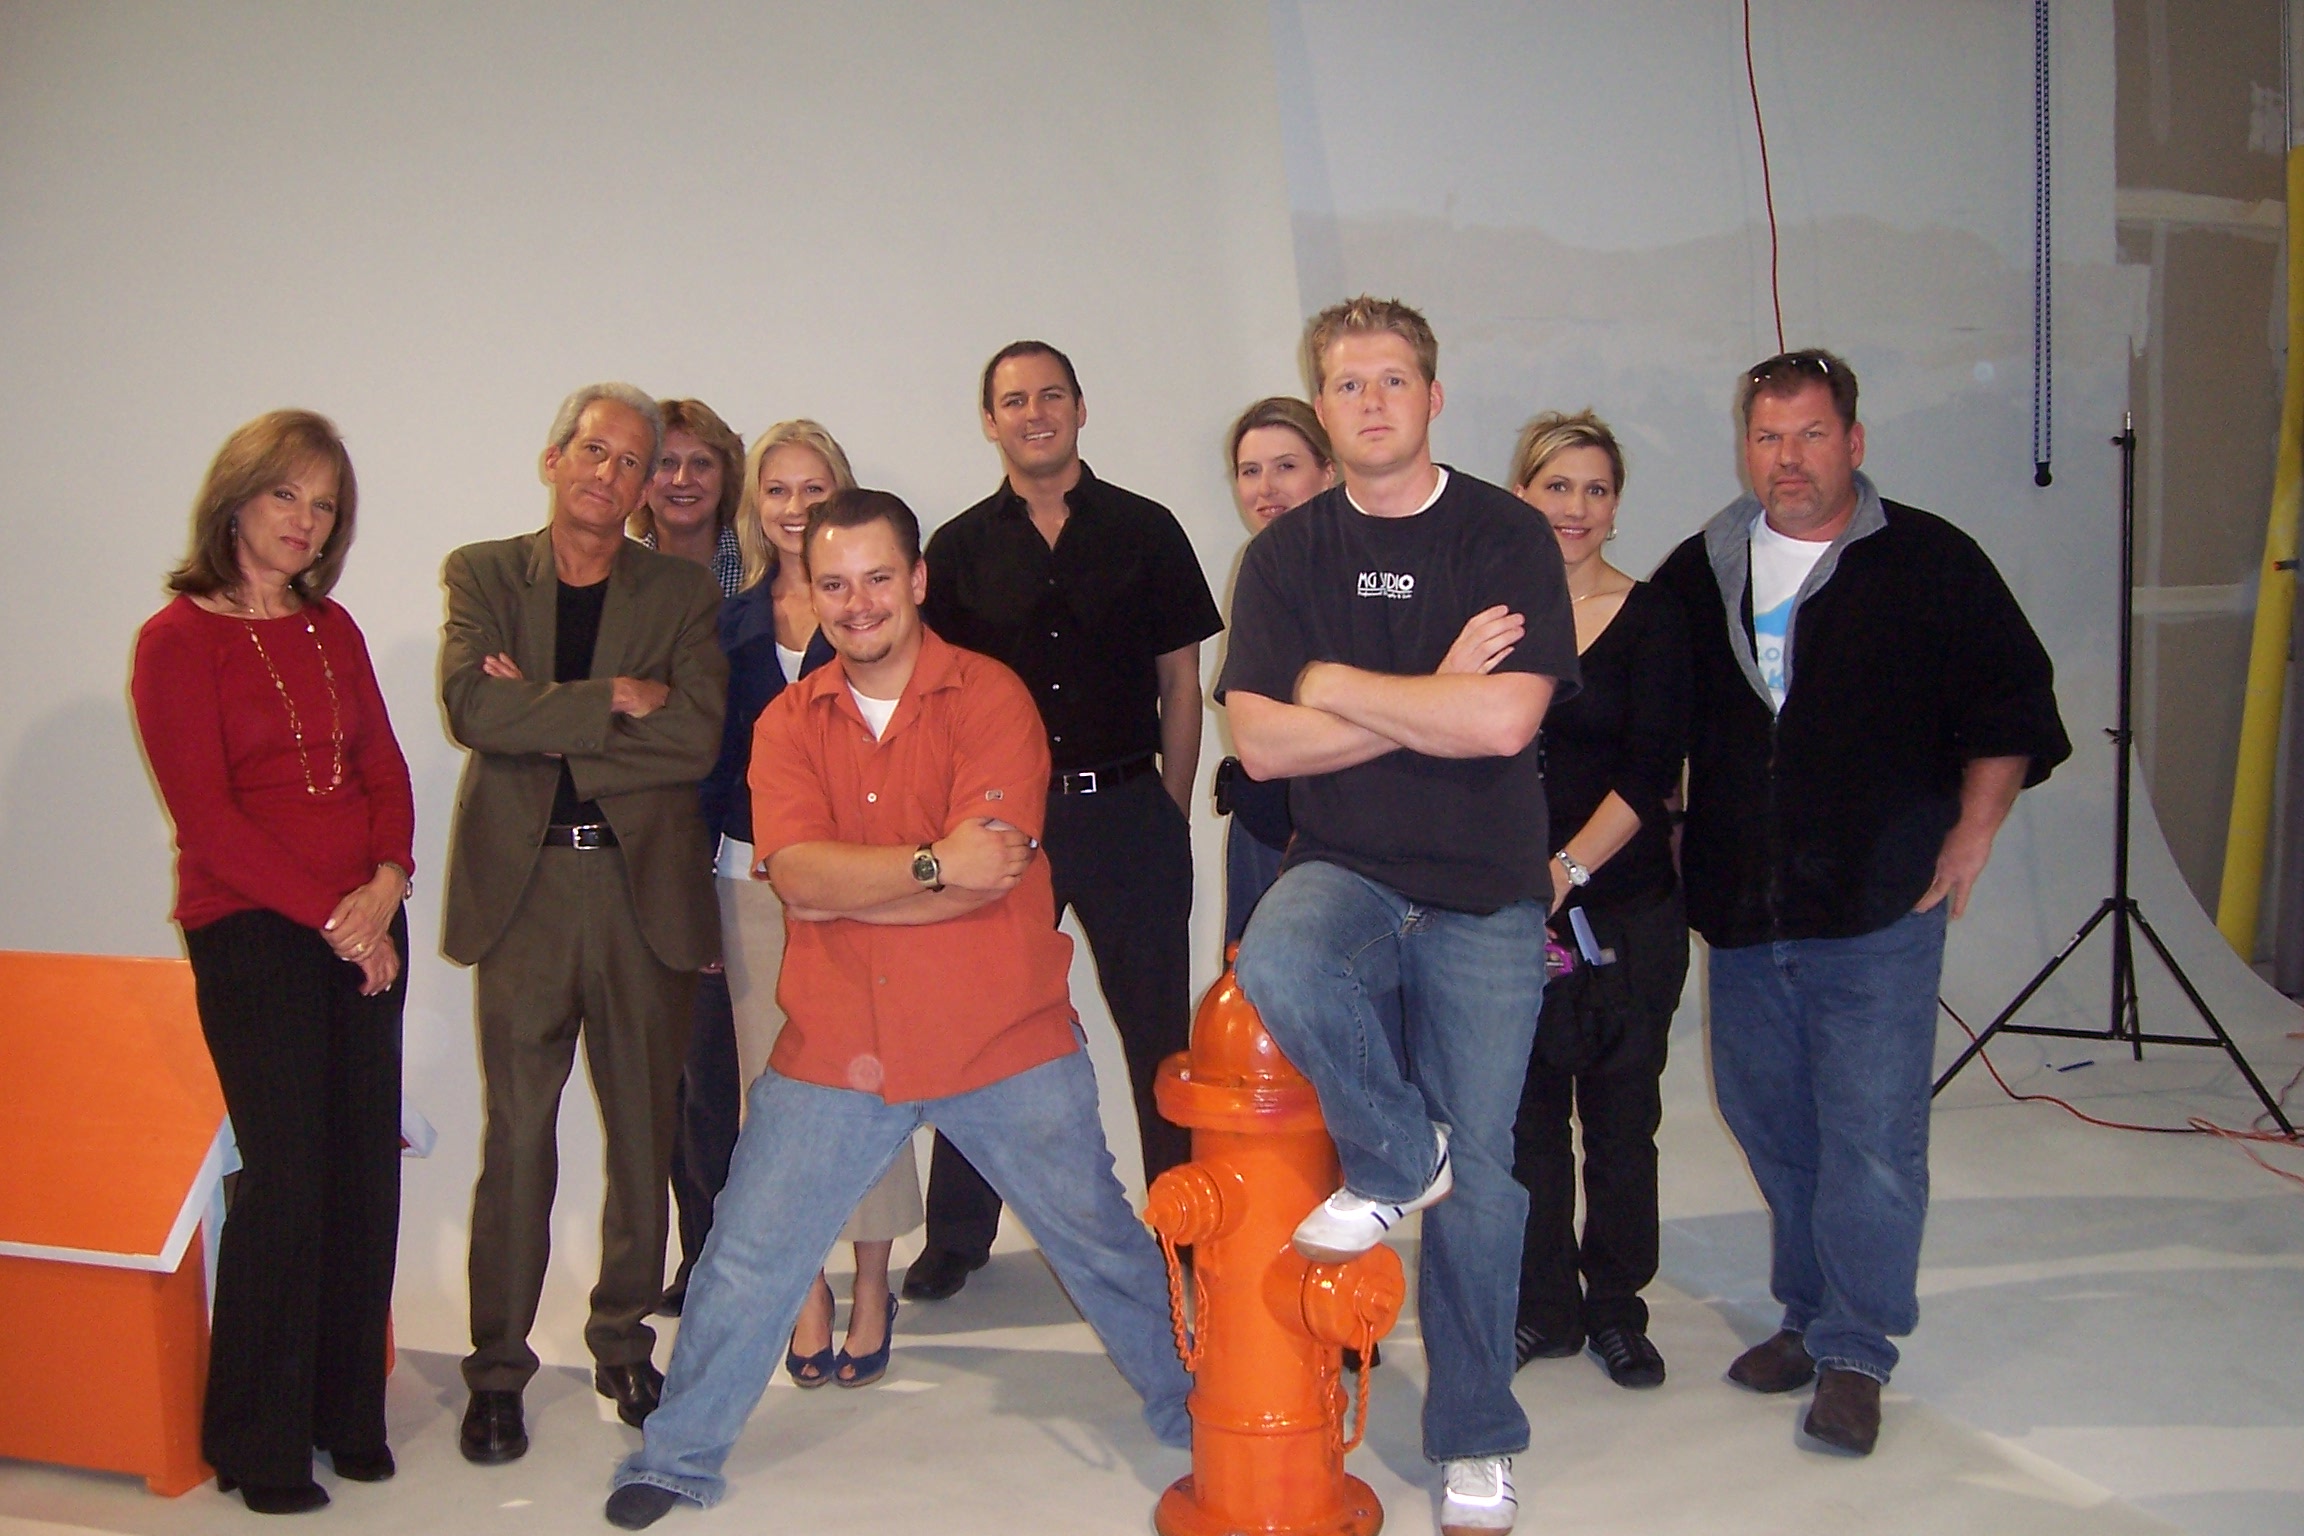 Me, Bobby Slayton, and the crew shooting his commercial for his show at HOOTERS Hotel and Casino that I directed.